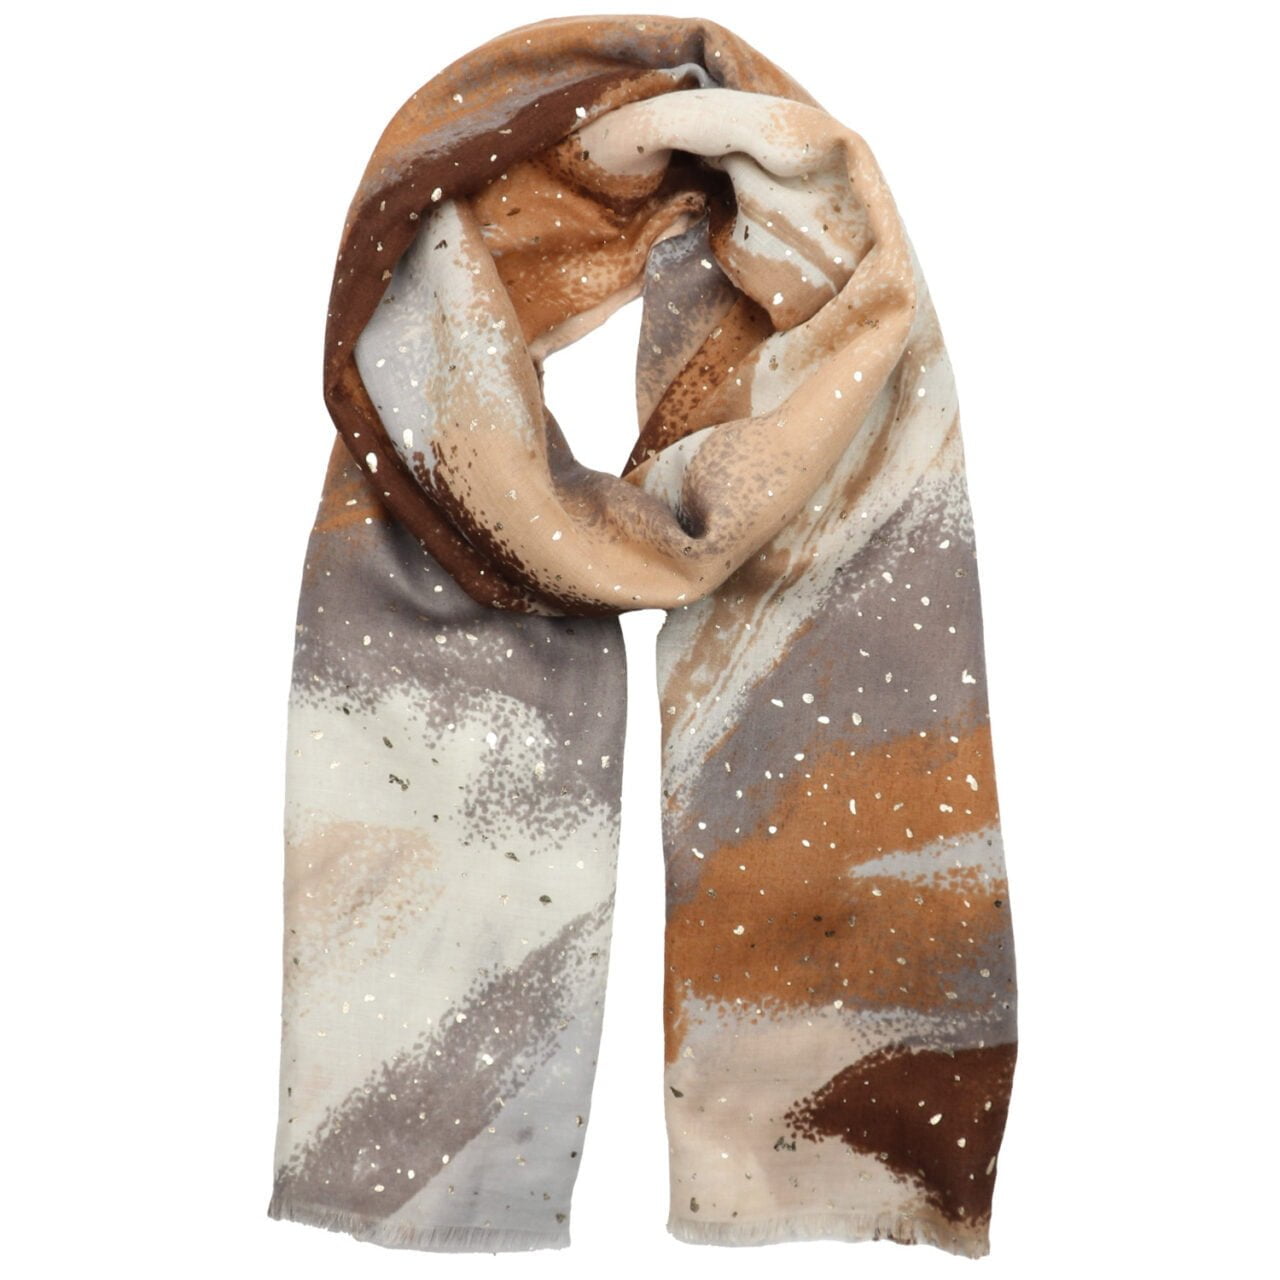 Fabulous Gifts Womens Accessories Scarf Cosmos Metallic Taupe by Weirs of Baggot Street